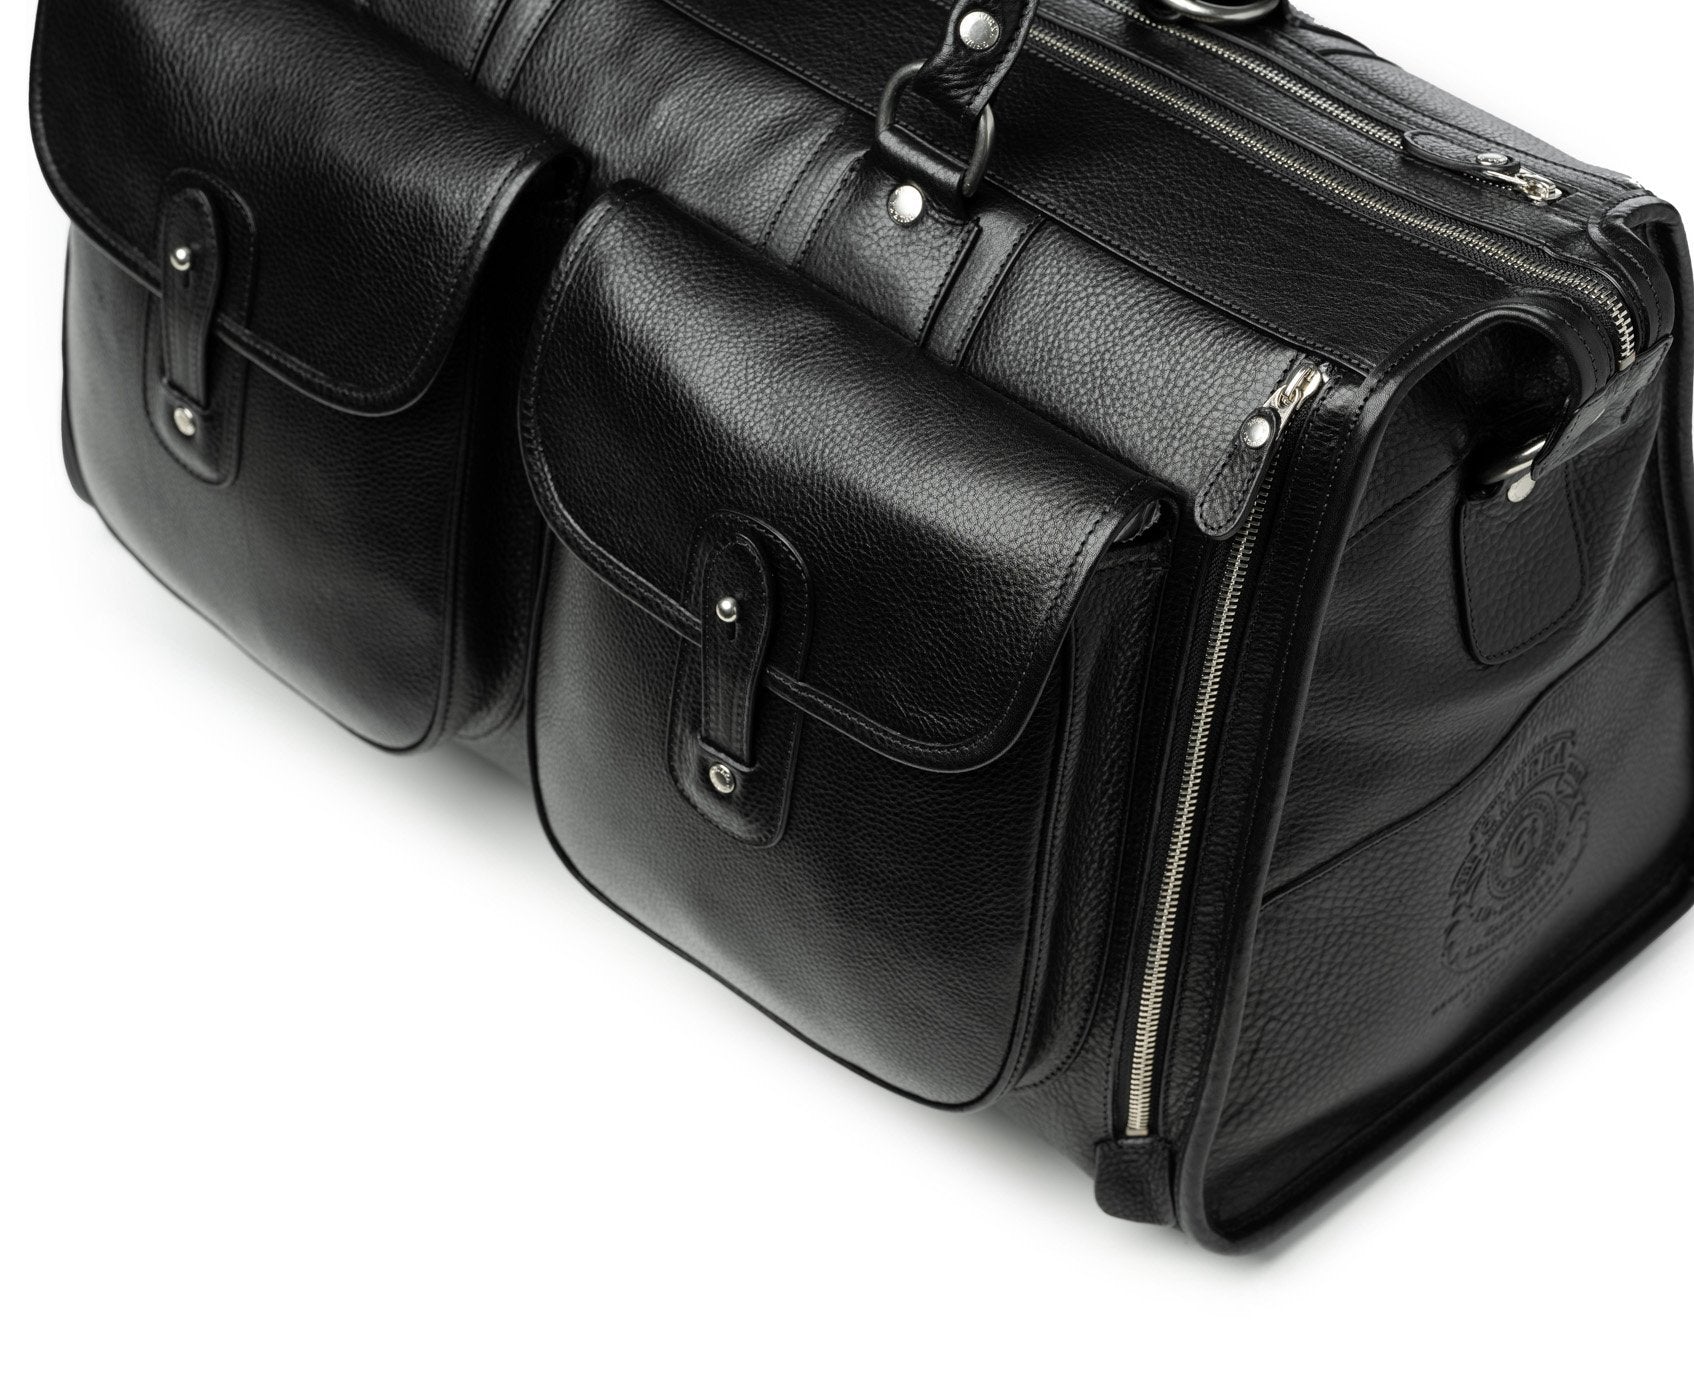 Patent leather travel bag